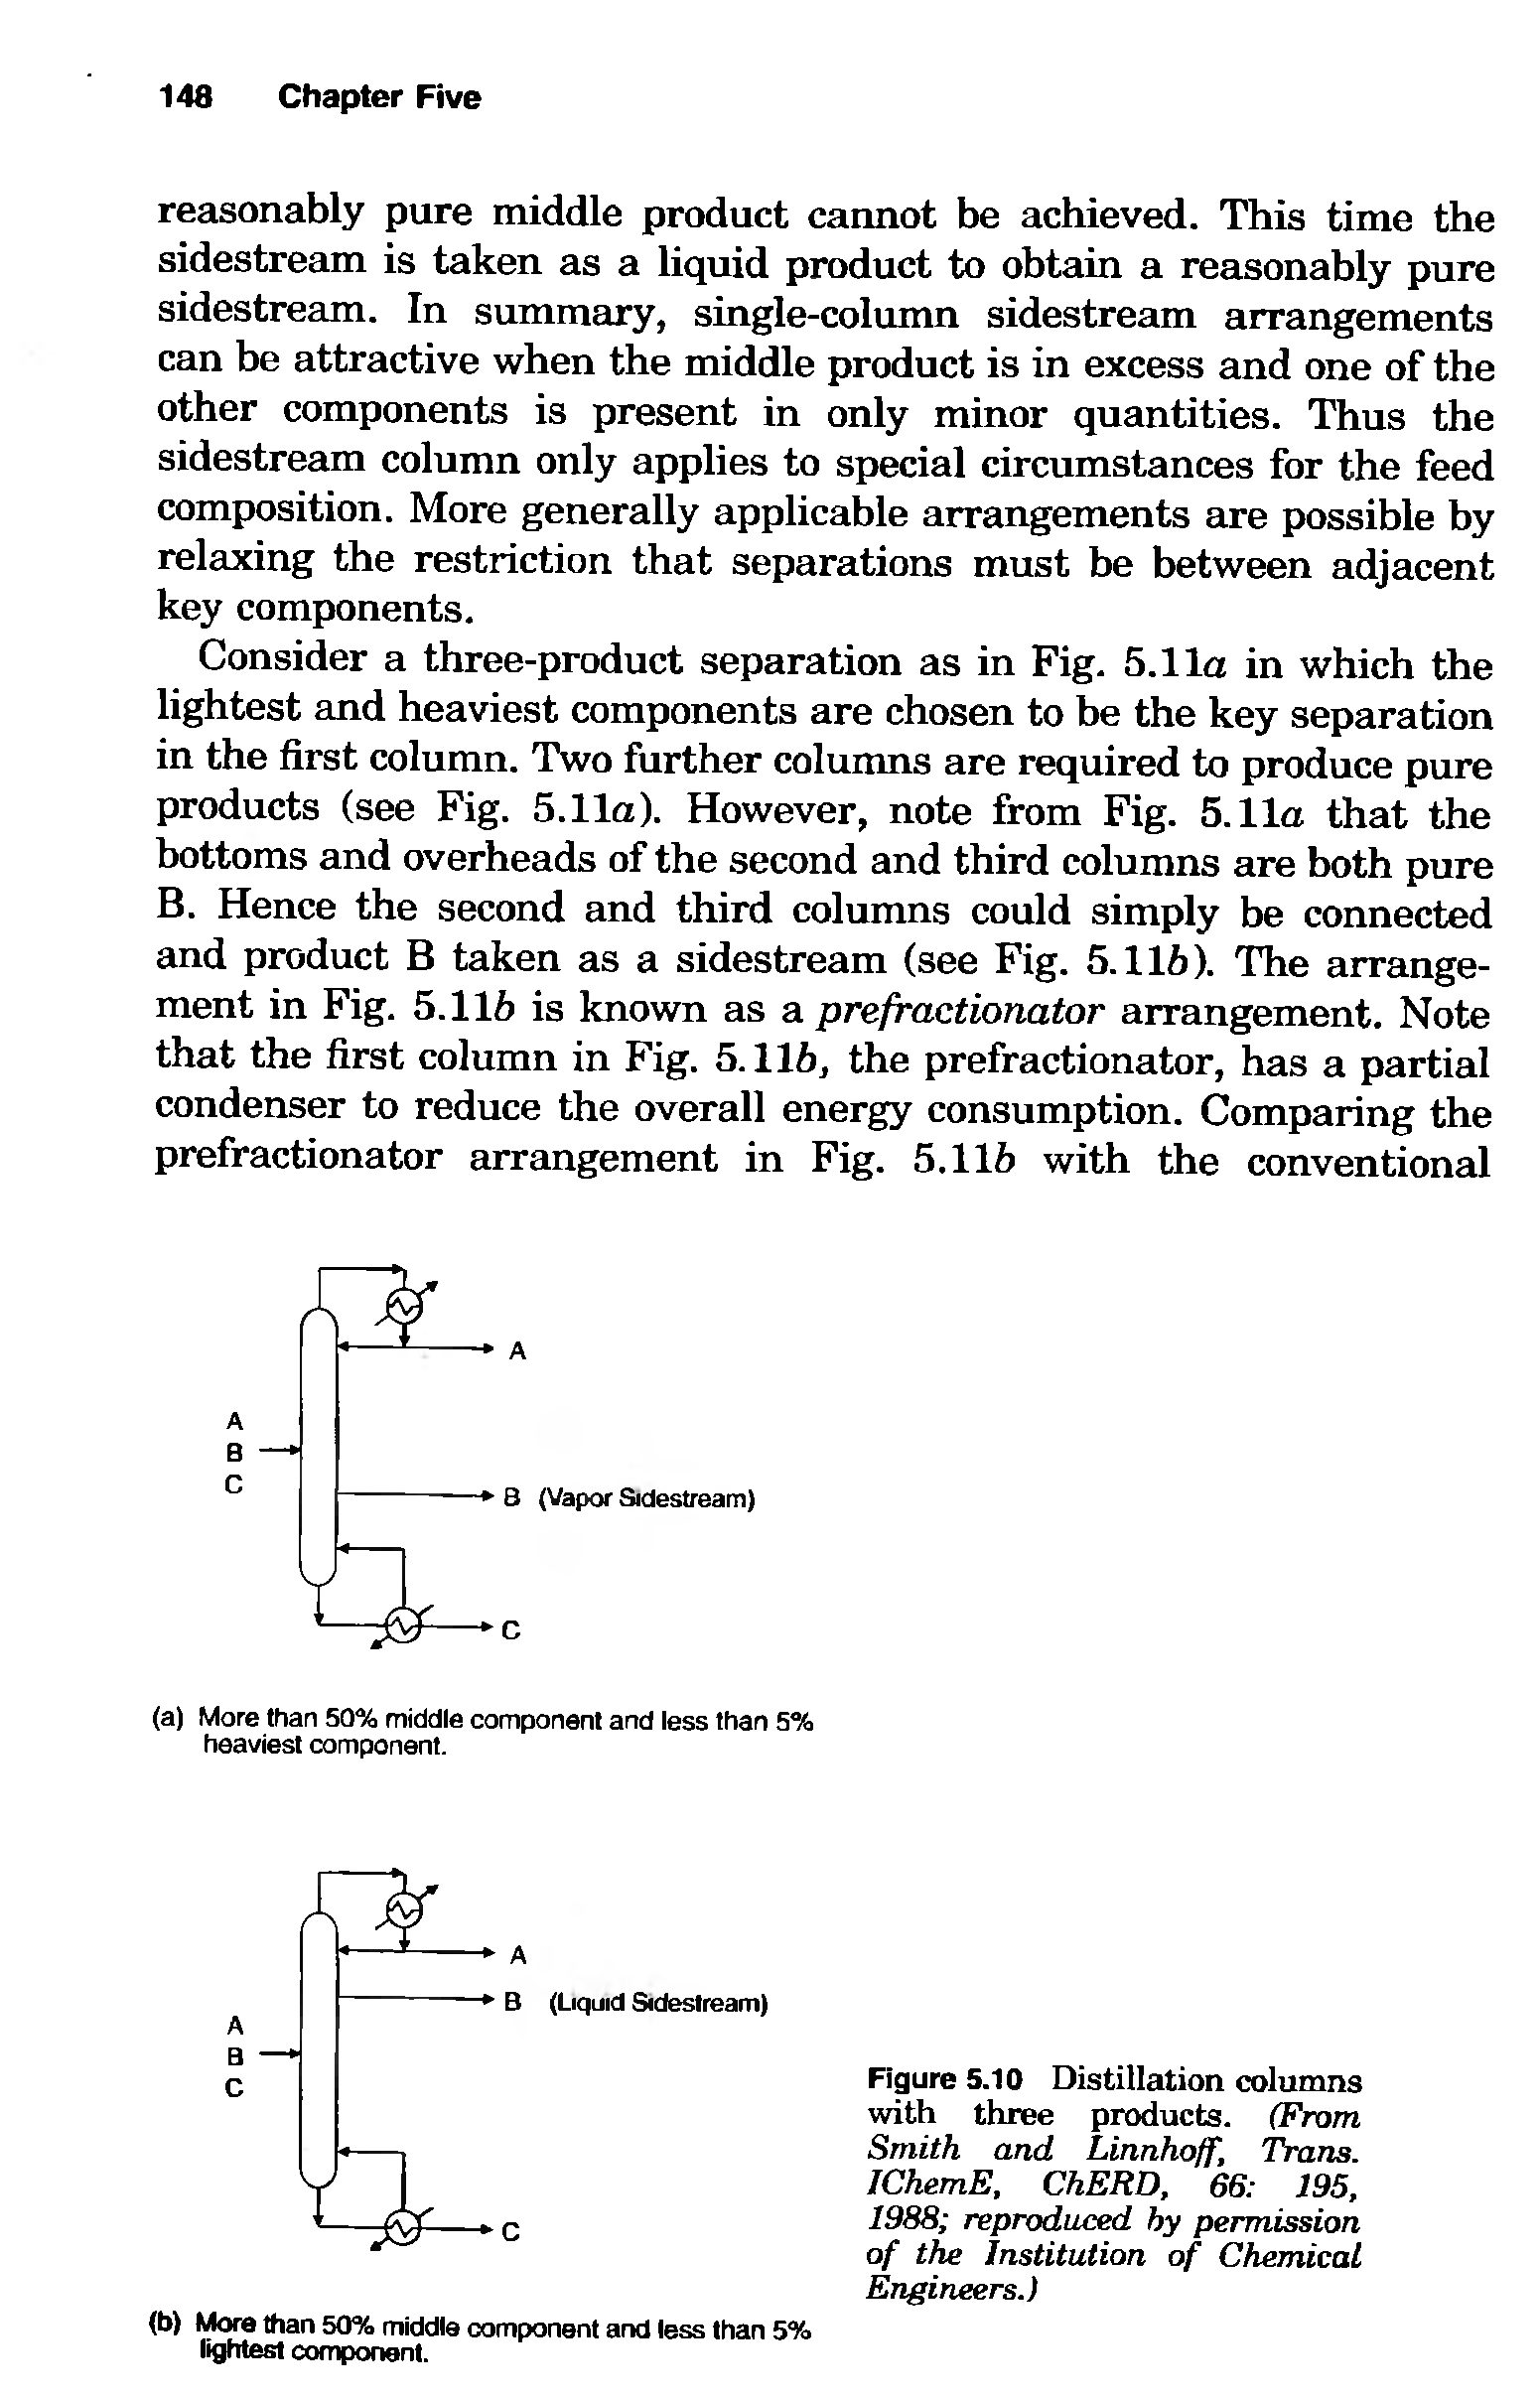 Figure 5.10 Distillation columns with three products. (From Smith and Linnhoff, TVans. IChemE, ChERD, 66 195. 1988 reproduced hy permission of the Institution of Chemical Engineers.)...